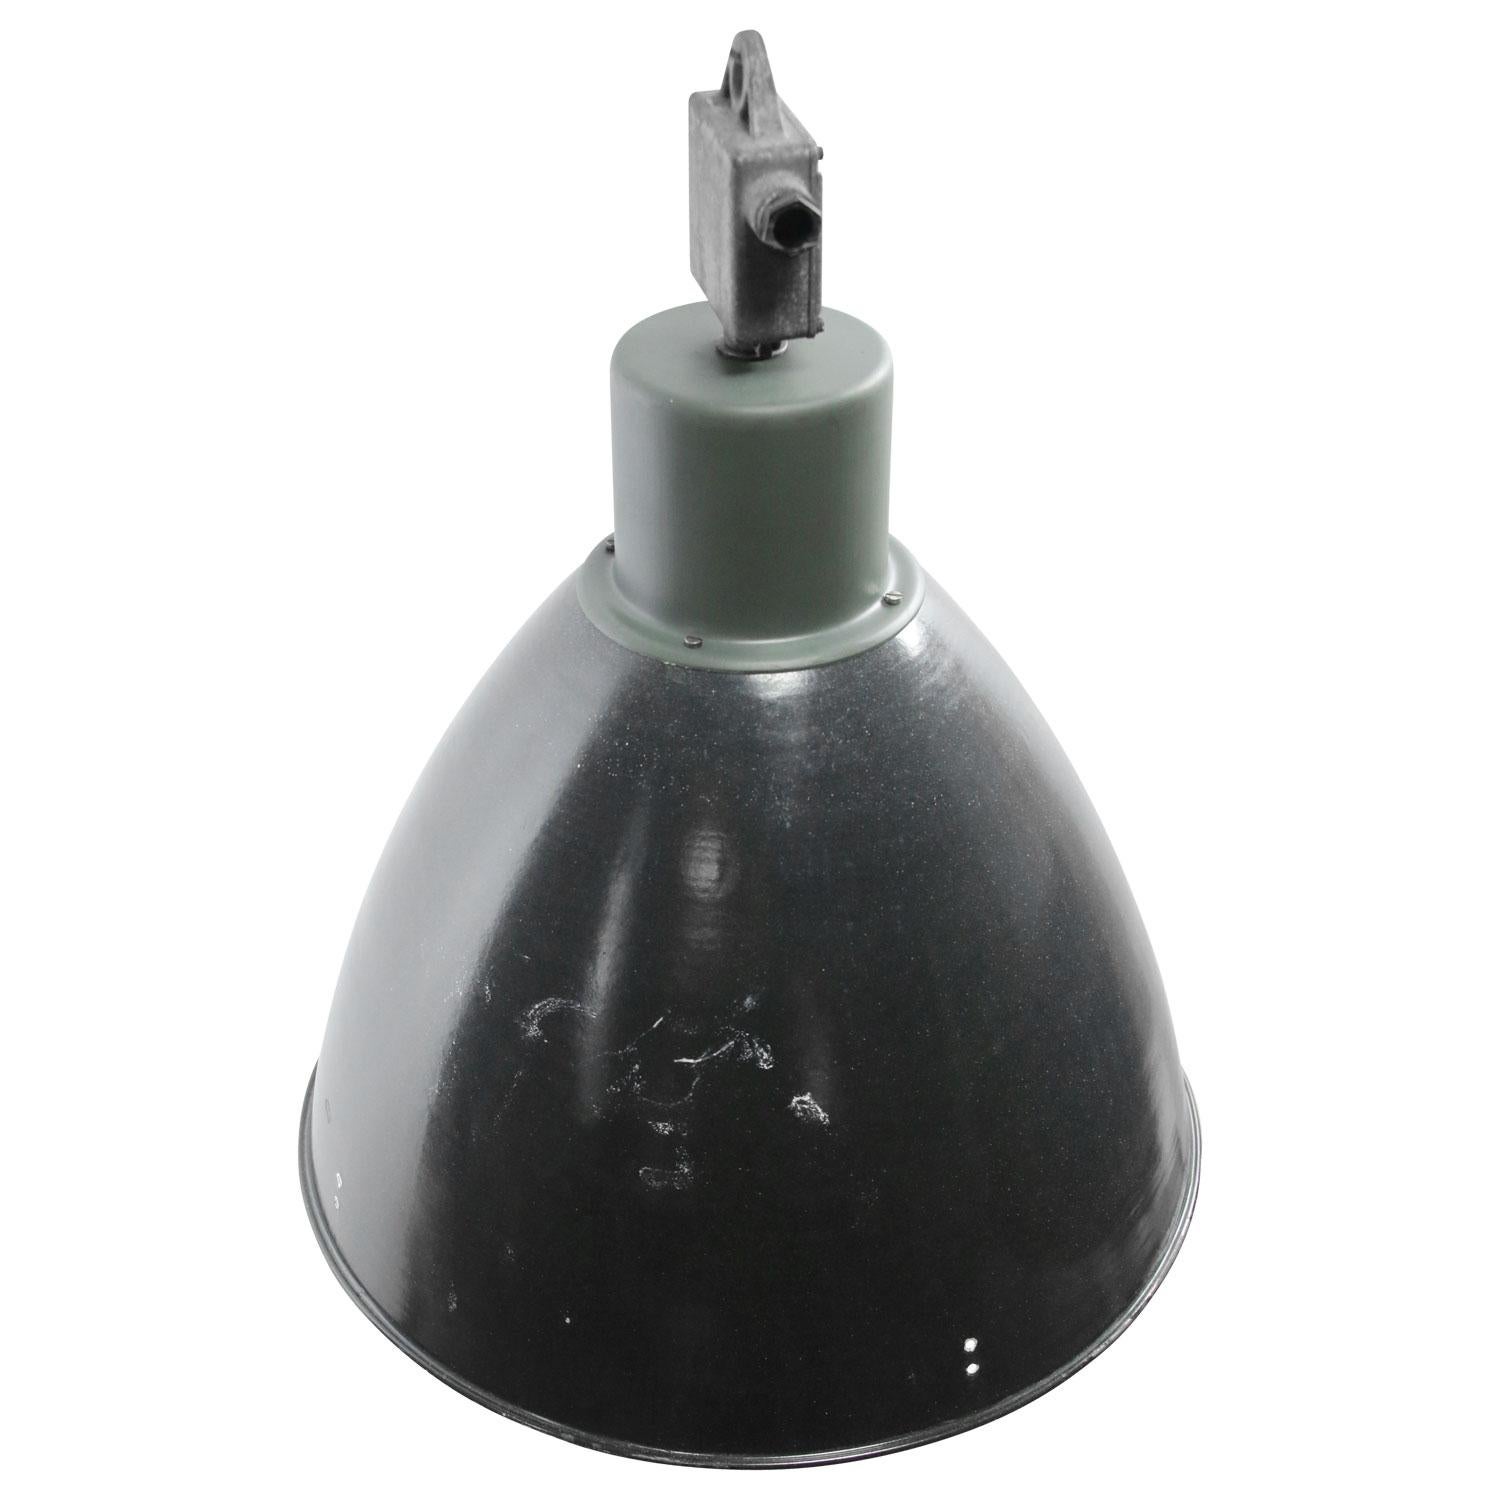 Industrial hanging lamp, dark gray enamel with white interior.
Cast aluminum top. 

Weight: 5.30 kg / 11.7 lb

Priced per individual item. All lamps have been made suitable by international standards for incandescent light bulbs,